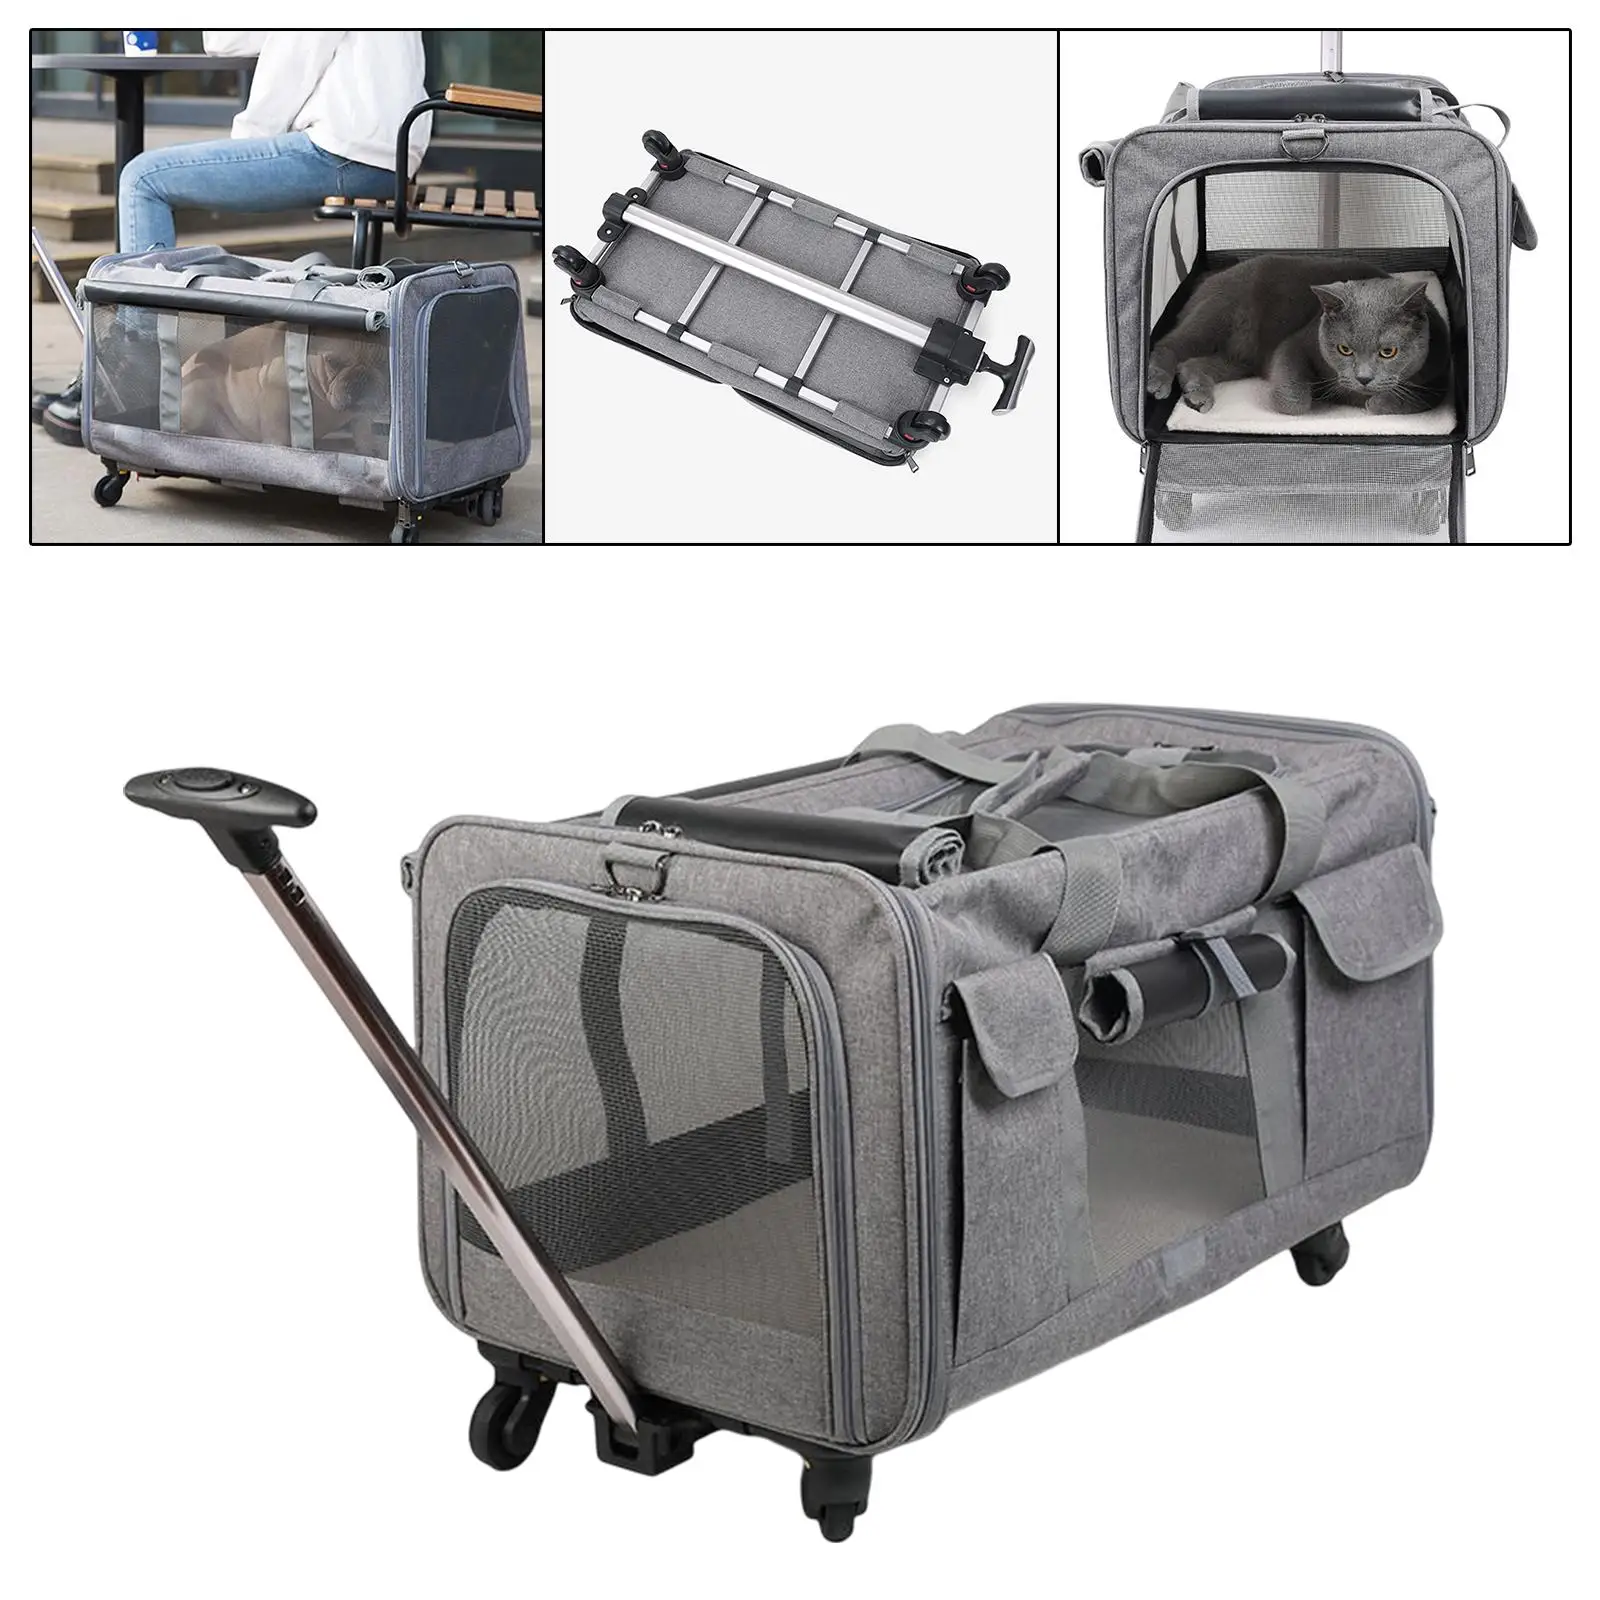 Dog Cats Trolley Case Cats Dogs Carrier with Detachable Wheels Freely Breathe with Pad Carrying Bag for Kitten Hiking Ventilated